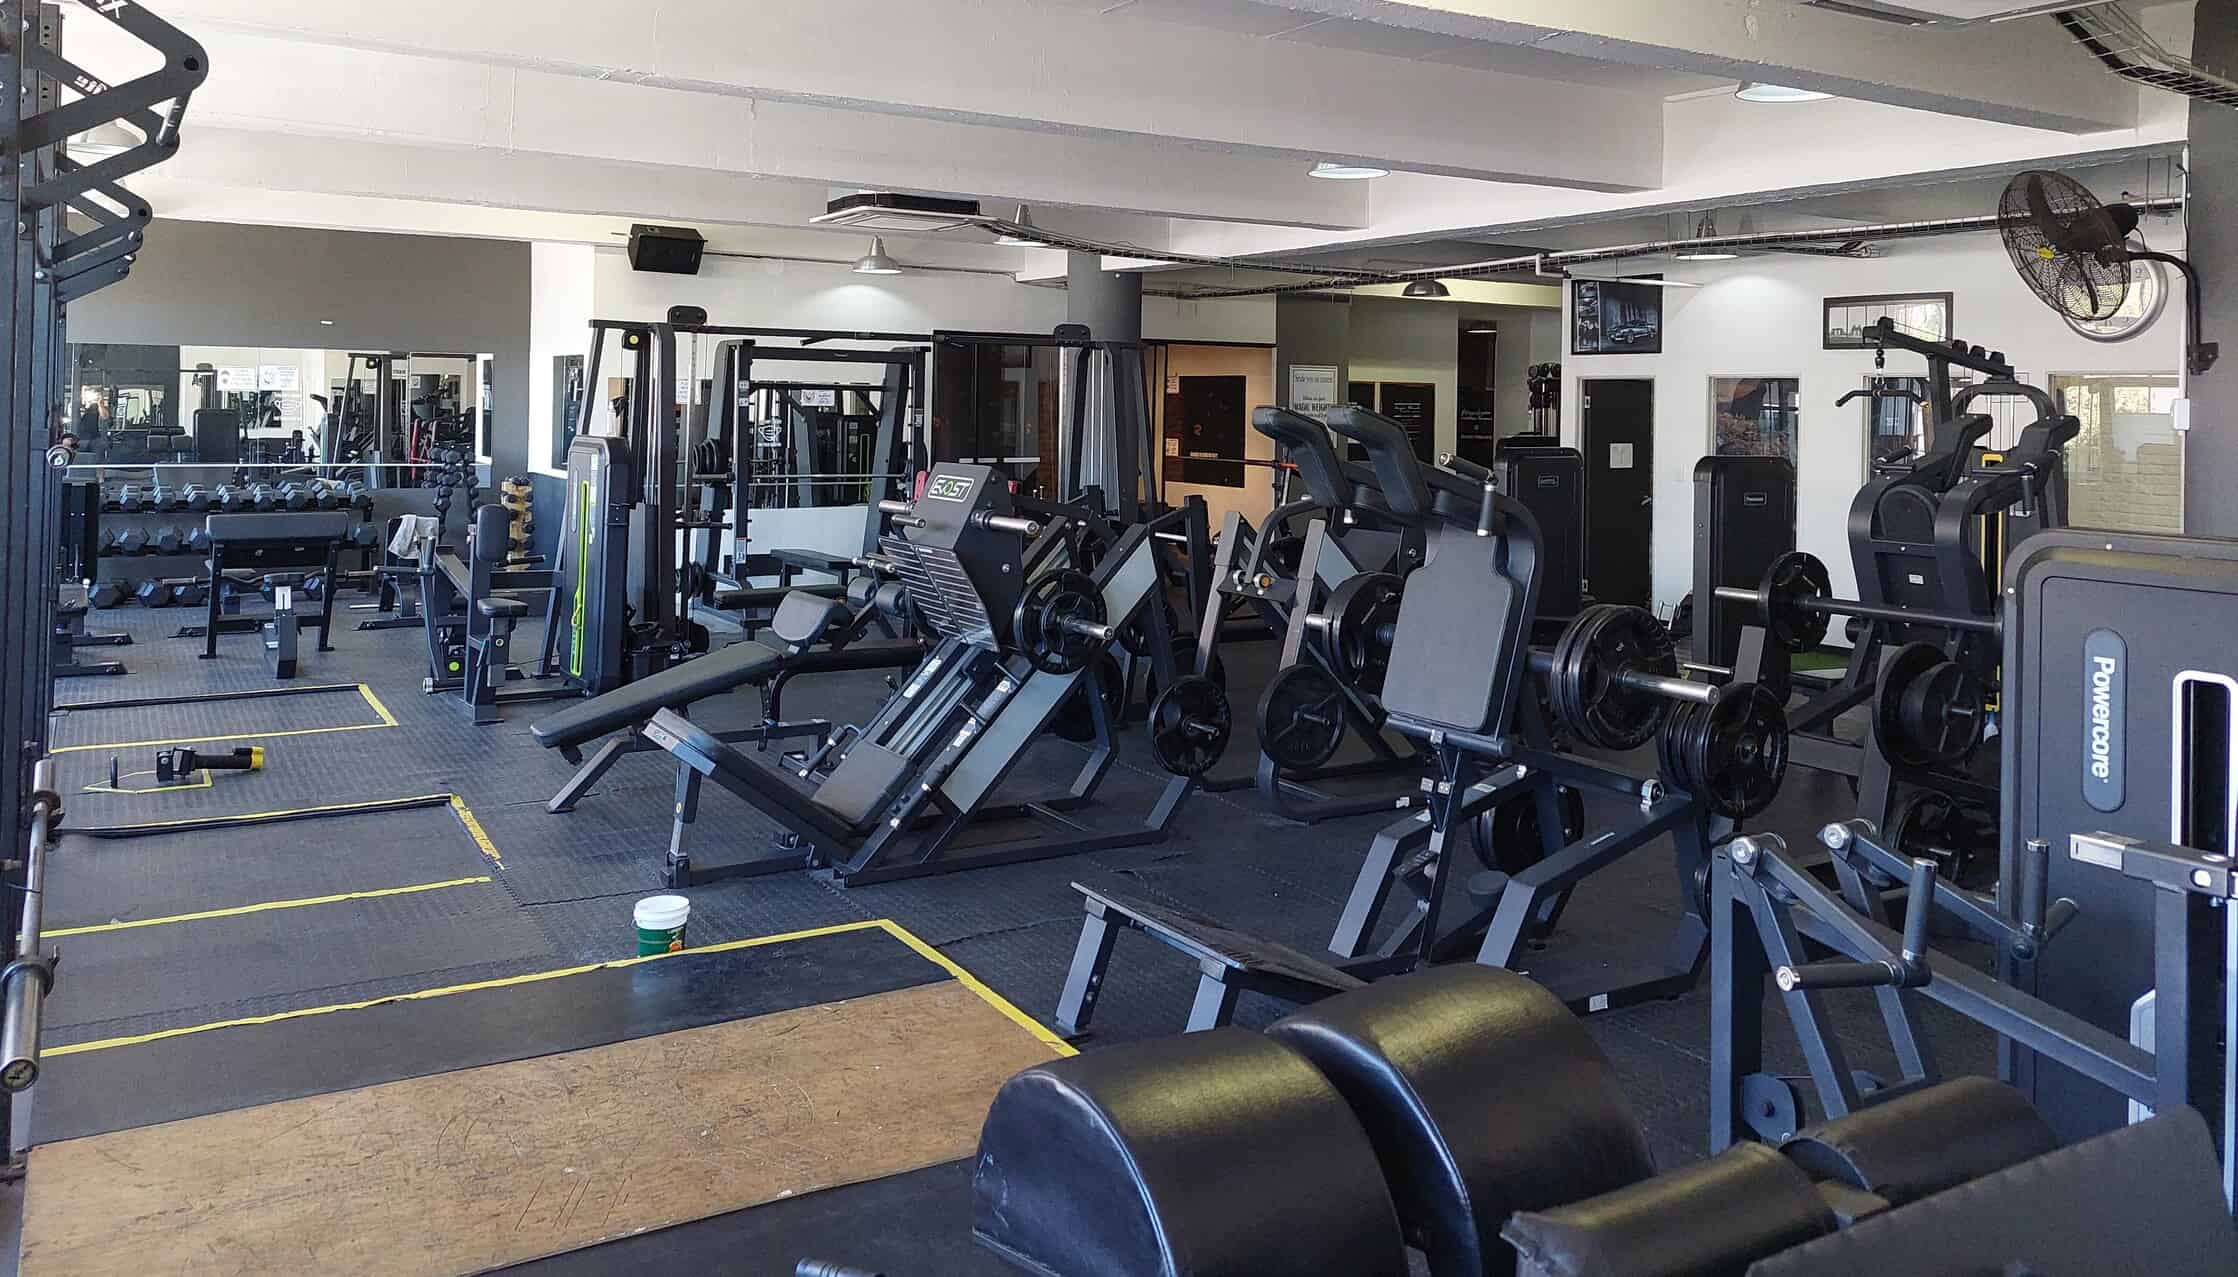 MyGym Roeland Street Cape Town.